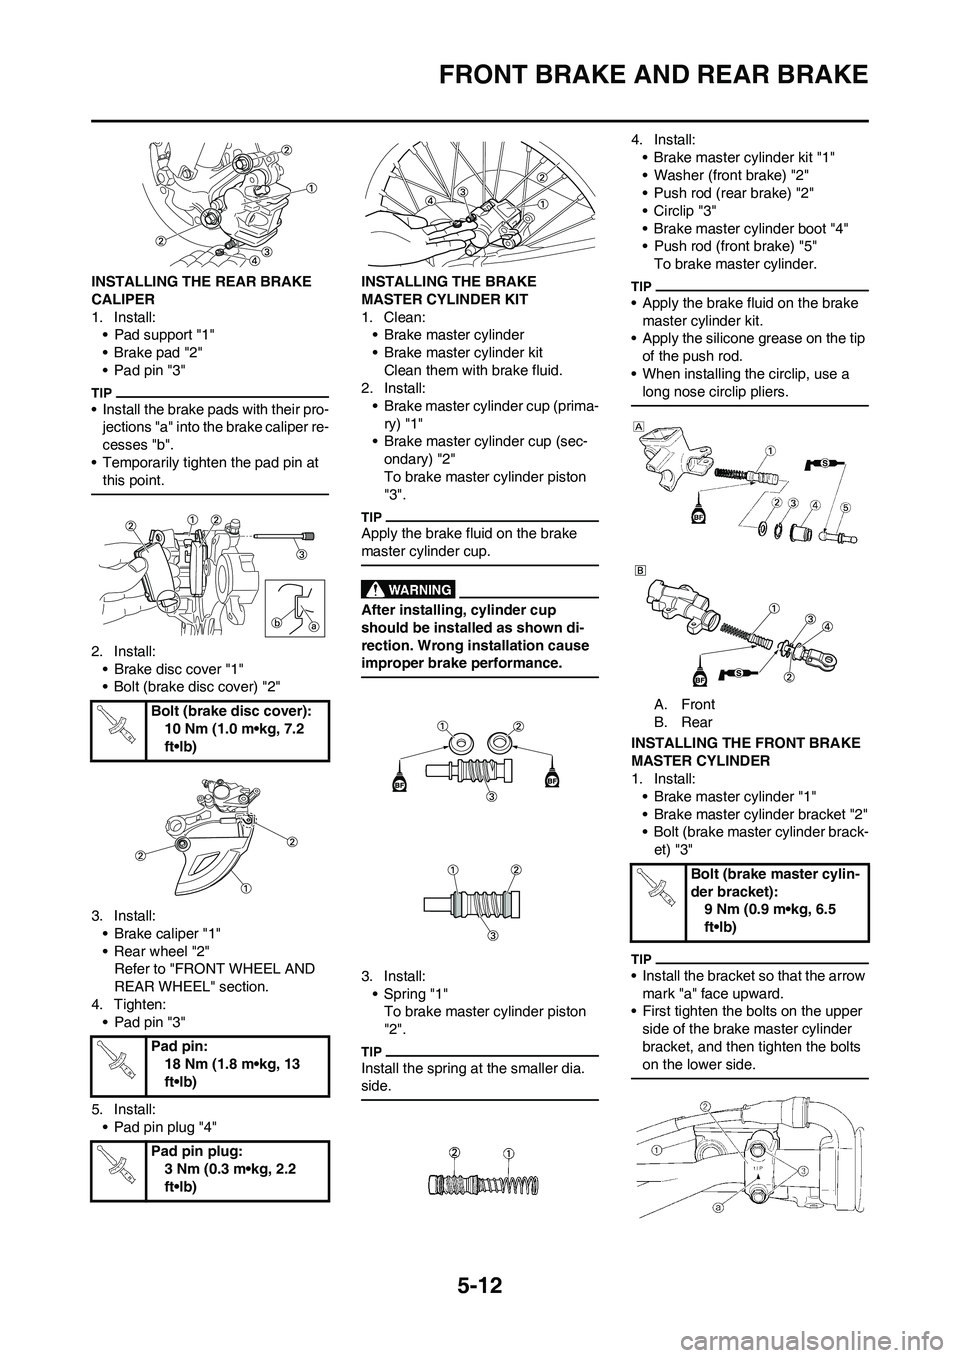 YAMAHA YZ450F 2009  Owners Manual 5-12
FRONT BRAKE AND REAR BRAKE
INSTALLING THE REAR BRAKE 
CALIPER
1. Install:
• Pad support "1"
• Brake pad "2"
• Pad pin "3"
• Install the brake pads with their pro-
jections "a" into the br